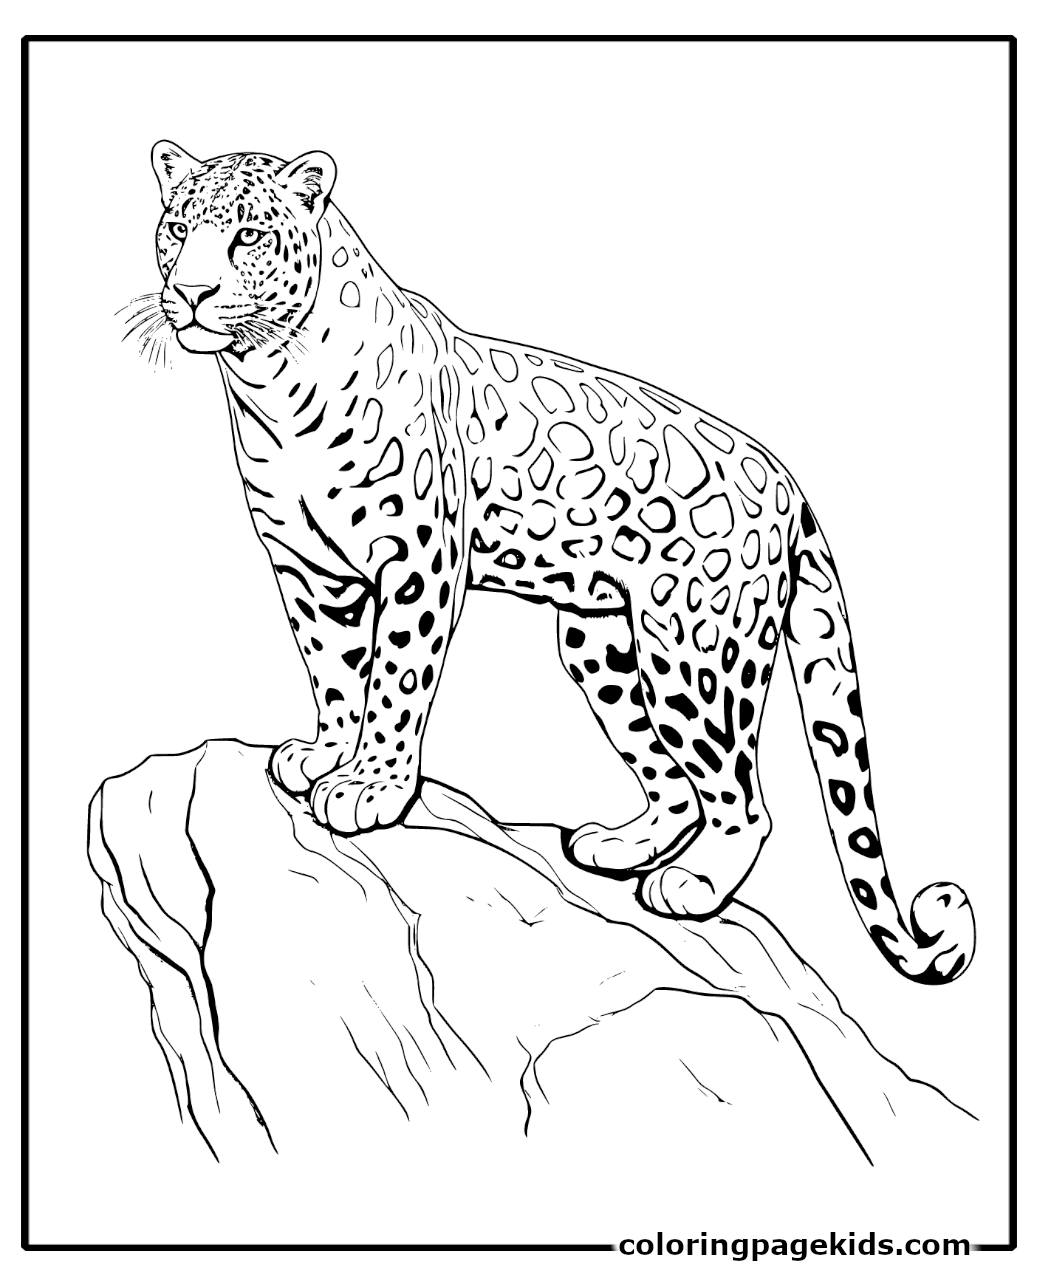 Unleashing Creativity with Leopard Coloring Pages For Kids